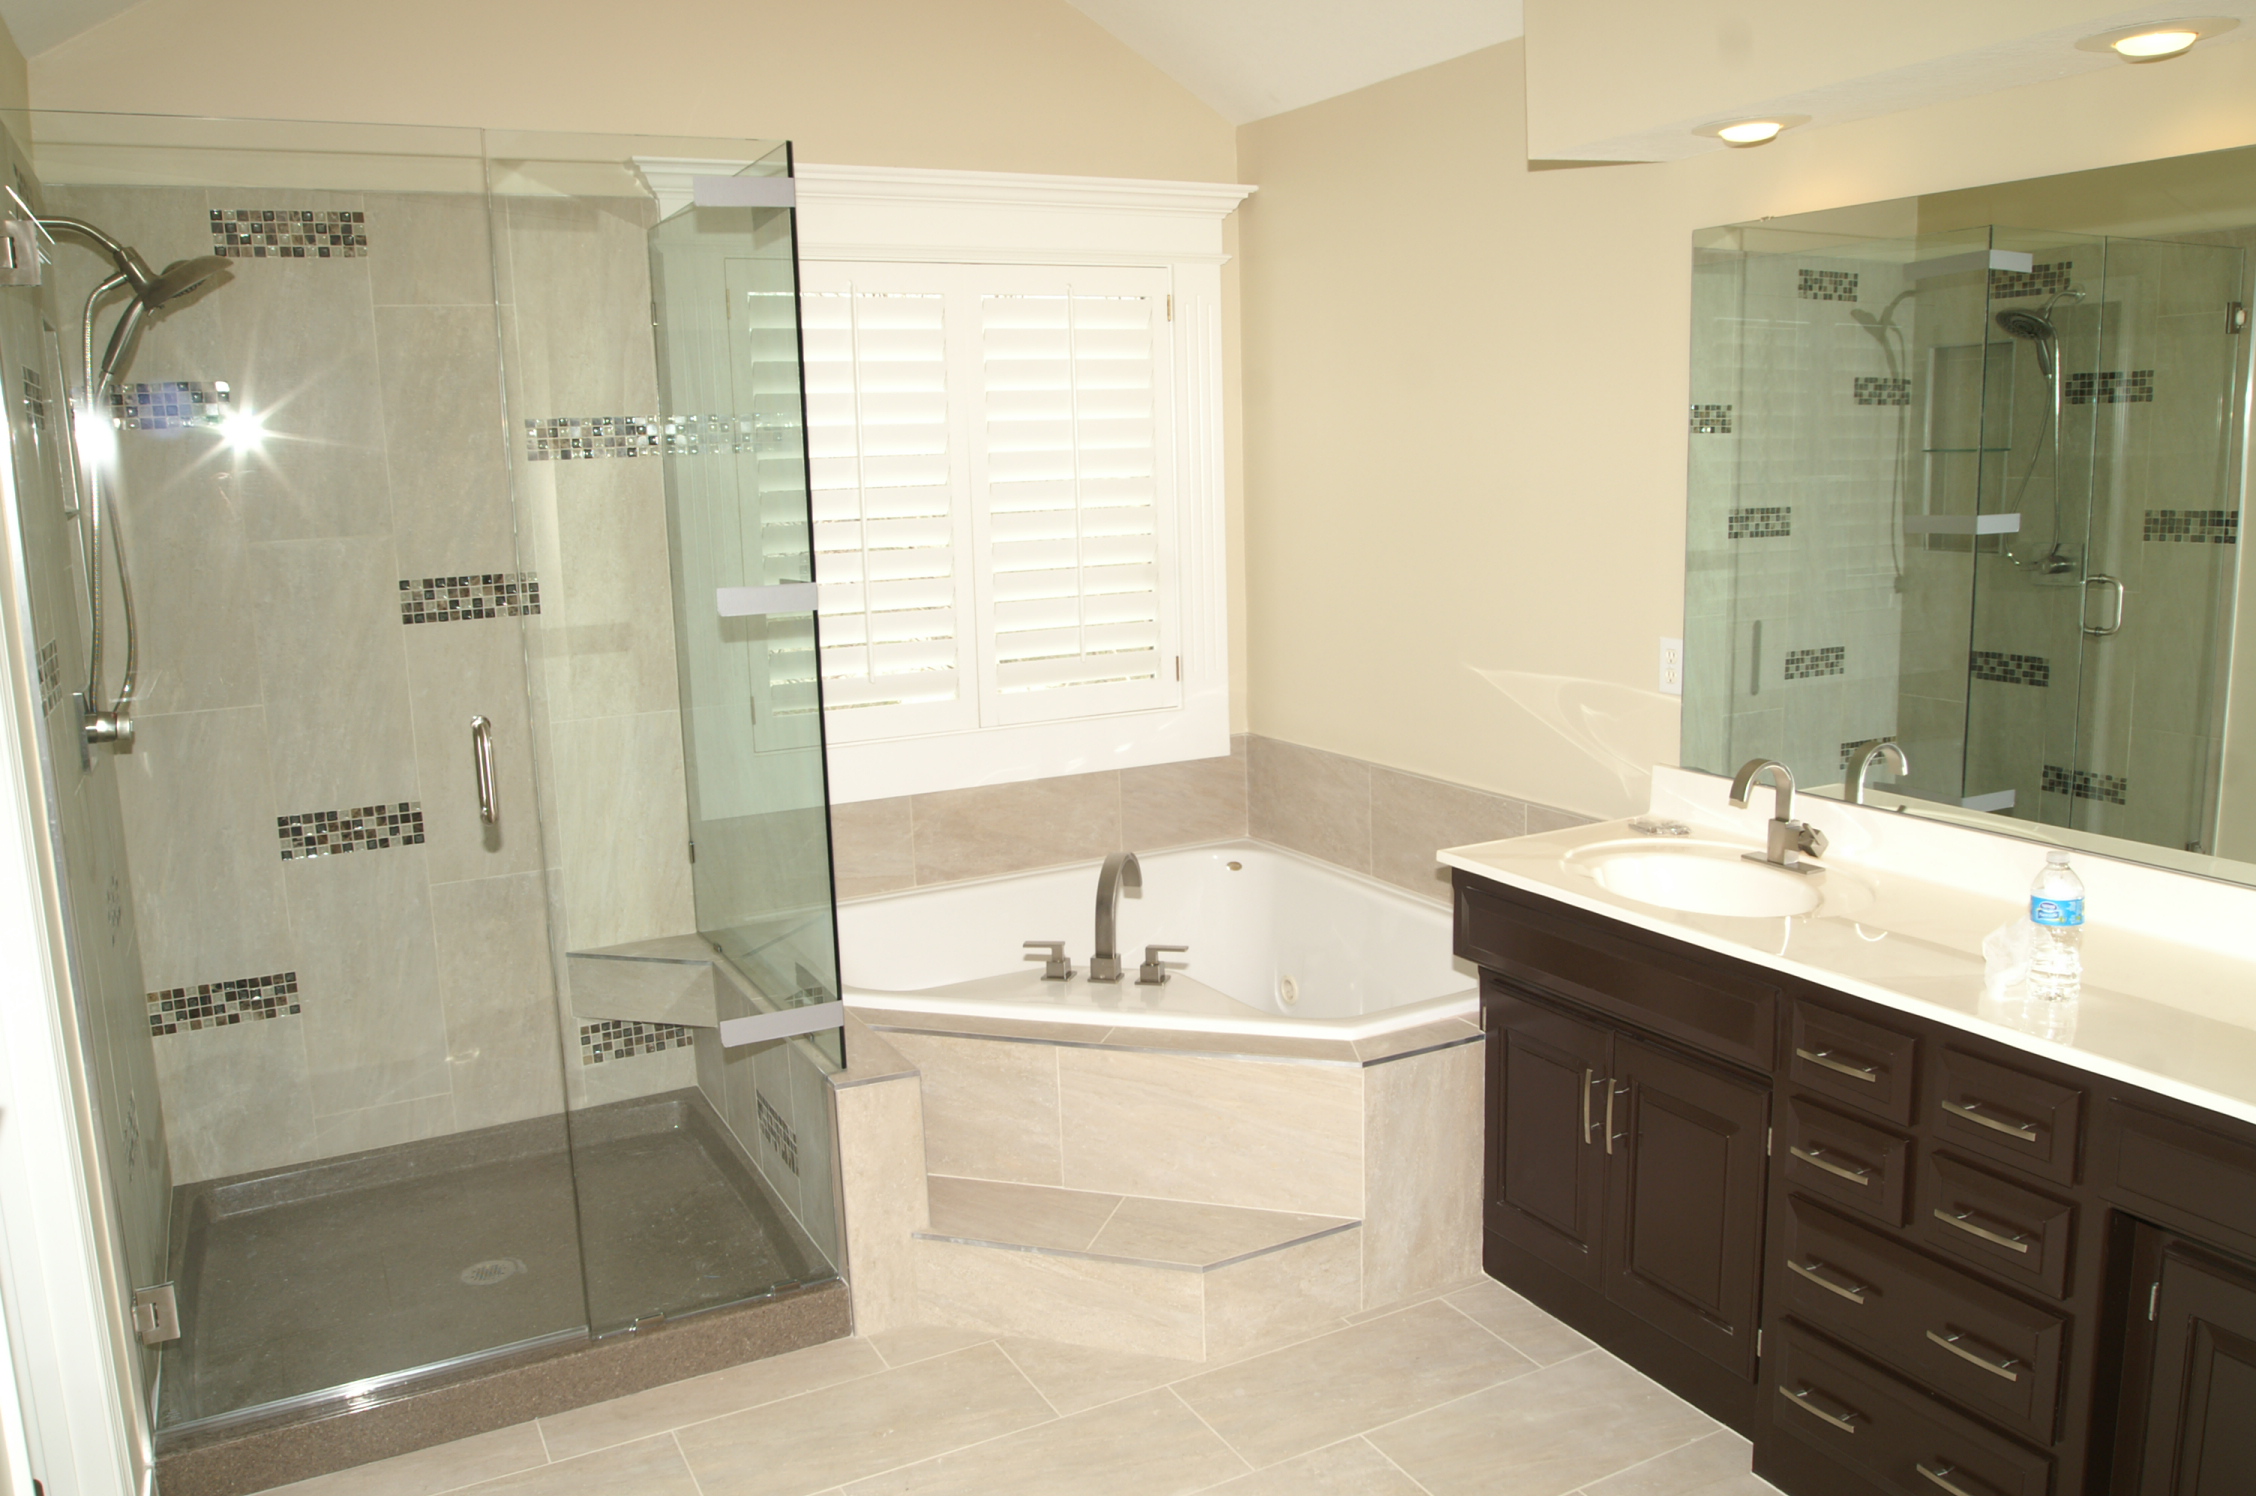 30 Best Of Bathroom Remodel Ideas What To Include In A Bathroom Remodel